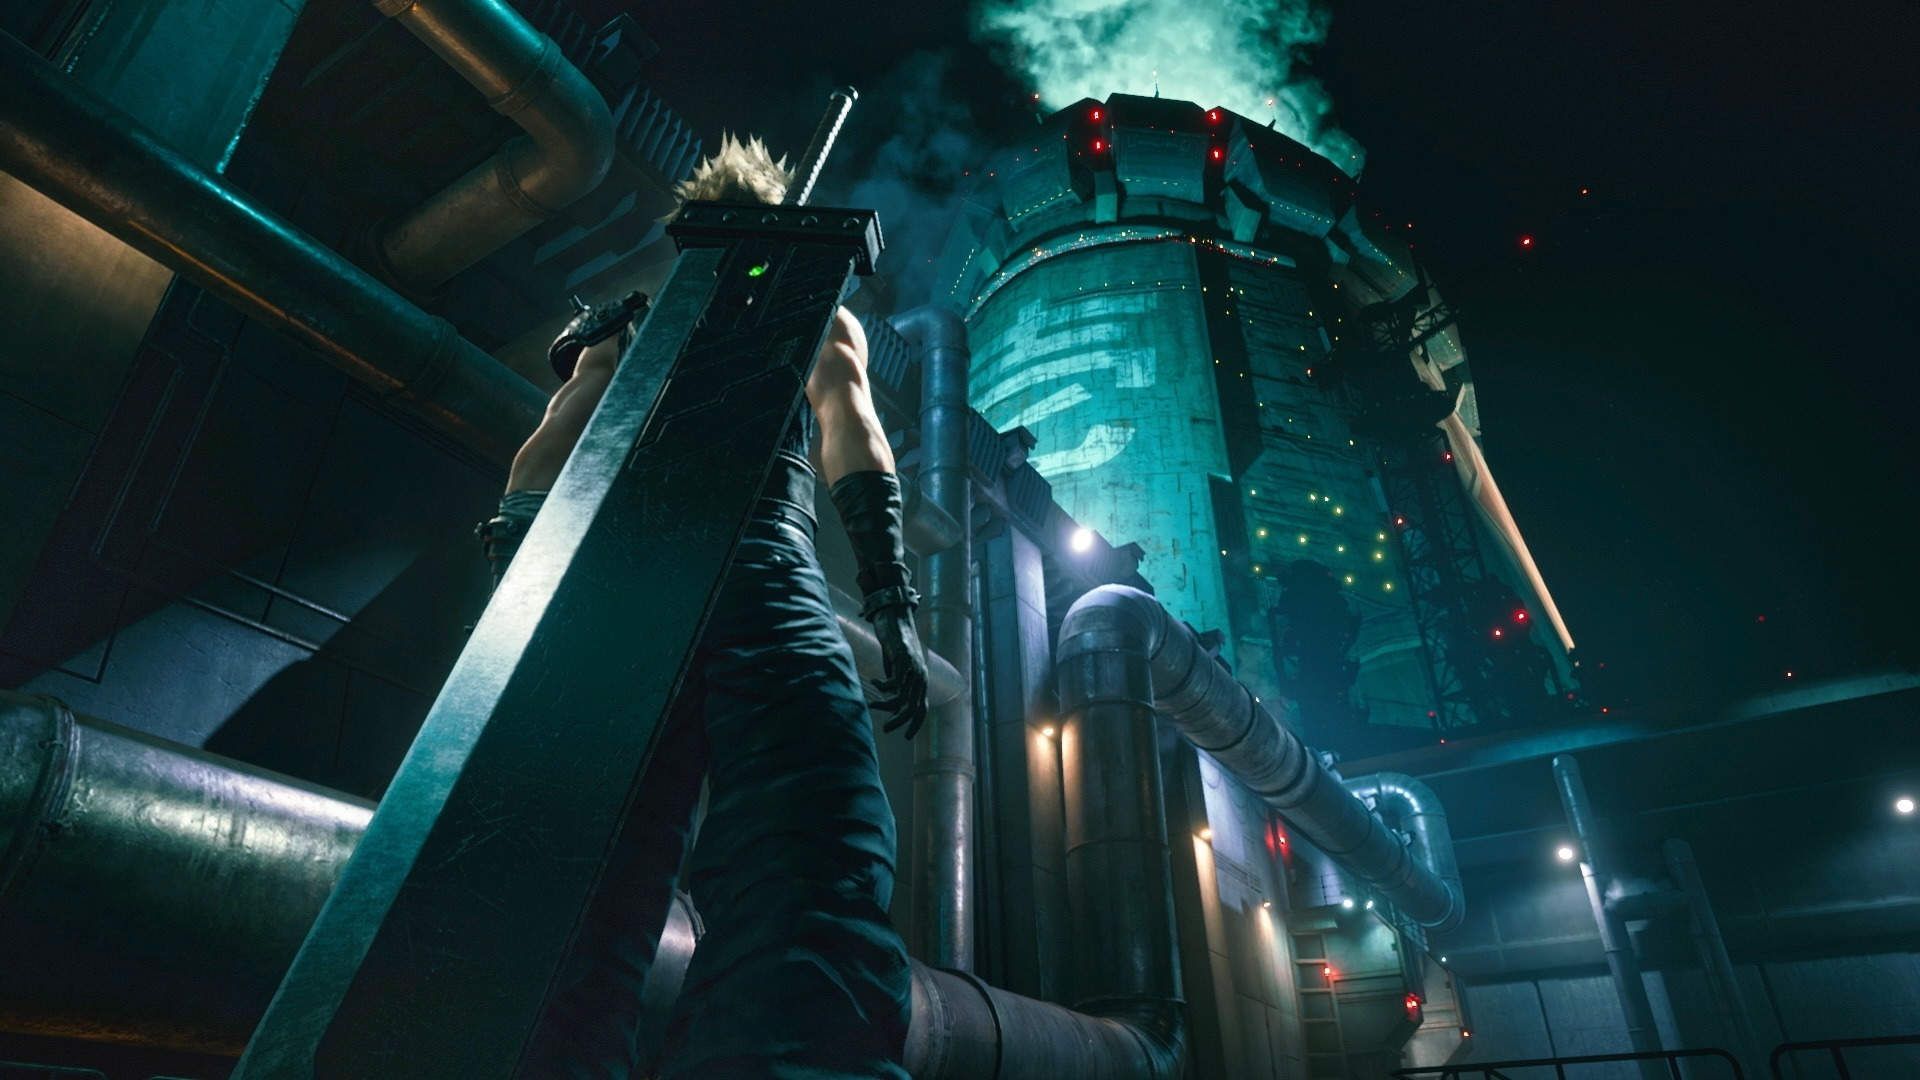 How to get the Final Fantasy 7 Remake PS4 theme